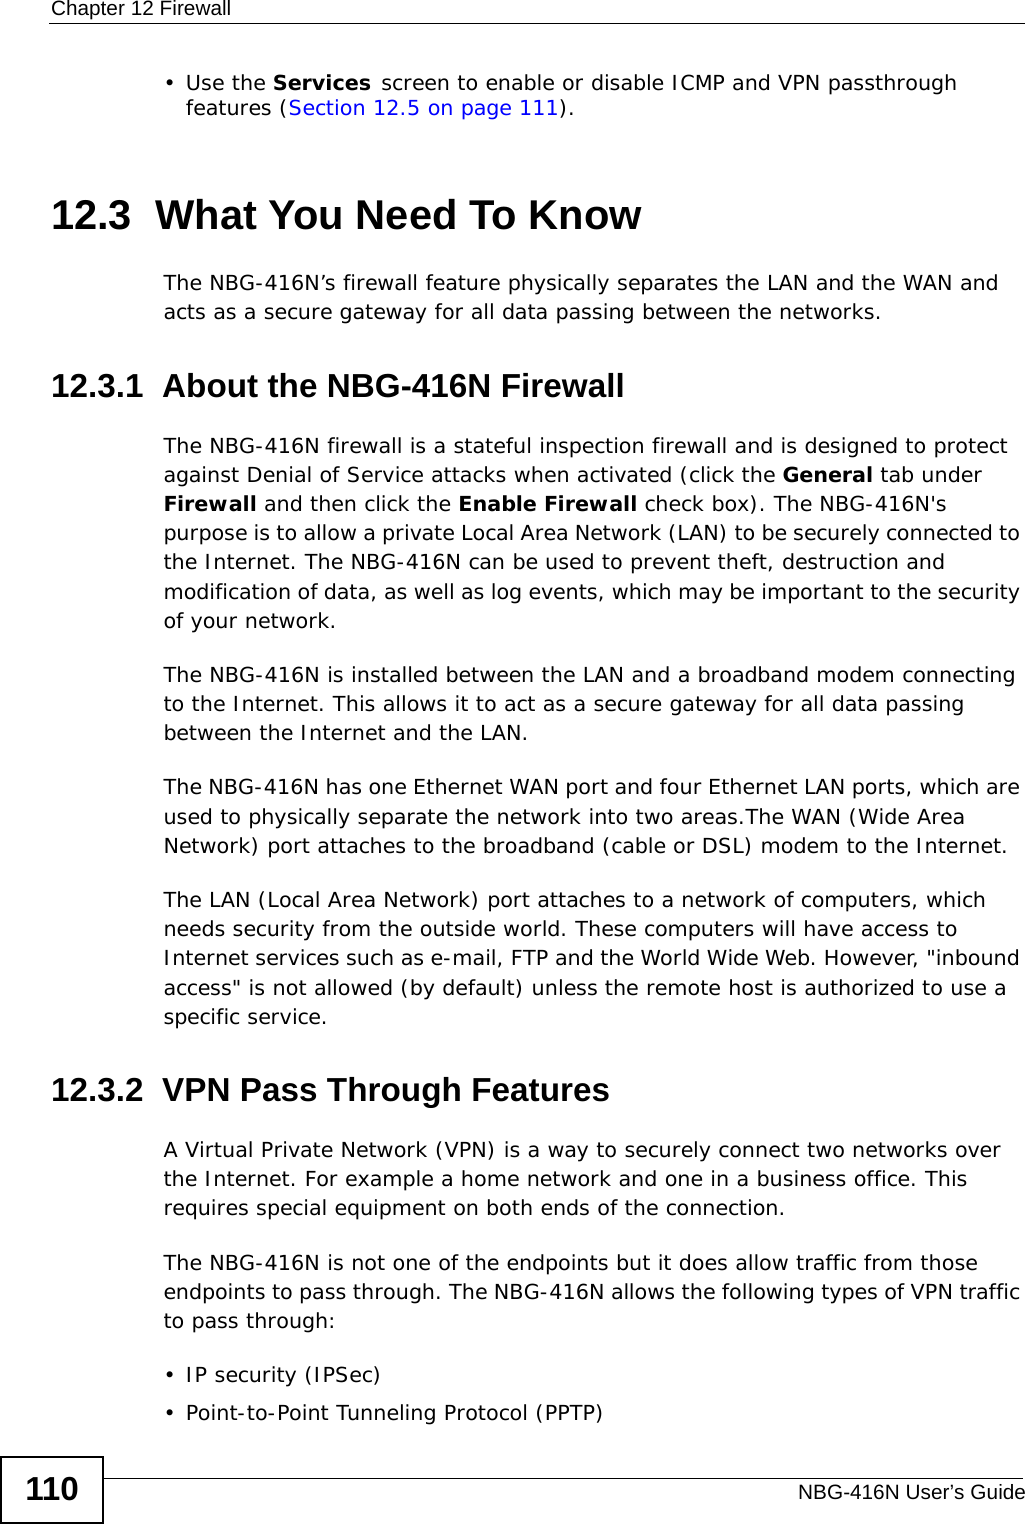 Chapter 12 FirewallNBG-416N User’s Guide110•Use the Services screen to enable or disable ICMP and VPN passthrough features (Section 12.5 on page 111).12.3  What You Need To KnowThe NBG-416N’s firewall feature physically separates the LAN and the WAN and acts as a secure gateway for all data passing between the networks.12.3.1  About the NBG-416N FirewallThe NBG-416N firewall is a stateful inspection firewall and is designed to protect against Denial of Service attacks when activated (click the General tab under Firewall and then click the Enable Firewall check box). The NBG-416N&apos;s purpose is to allow a private Local Area Network (LAN) to be securely connected to the Internet. The NBG-416N can be used to prevent theft, destruction and modification of data, as well as log events, which may be important to the security of your network. The NBG-416N is installed between the LAN and a broadband modem connecting to the Internet. This allows it to act as a secure gateway for all data passing between the Internet and the LAN.The NBG-416N has one Ethernet WAN port and four Ethernet LAN ports, which are used to physically separate the network into two areas.The WAN (Wide Area Network) port attaches to the broadband (cable or DSL) modem to the Internet.The LAN (Local Area Network) port attaches to a network of computers, which needs security from the outside world. These computers will have access to Internet services such as e-mail, FTP and the World Wide Web. However, &quot;inbound access&quot; is not allowed (by default) unless the remote host is authorized to use a specific service.12.3.2  VPN Pass Through FeaturesA Virtual Private Network (VPN) is a way to securely connect two networks over the Internet. For example a home network and one in a business office. This requires special equipment on both ends of the connection.The NBG-416N is not one of the endpoints but it does allow traffic from those endpoints to pass through. The NBG-416N allows the following types of VPN traffic to pass through:• IP security (IPSec)• Point-to-Point Tunneling Protocol (PPTP) 